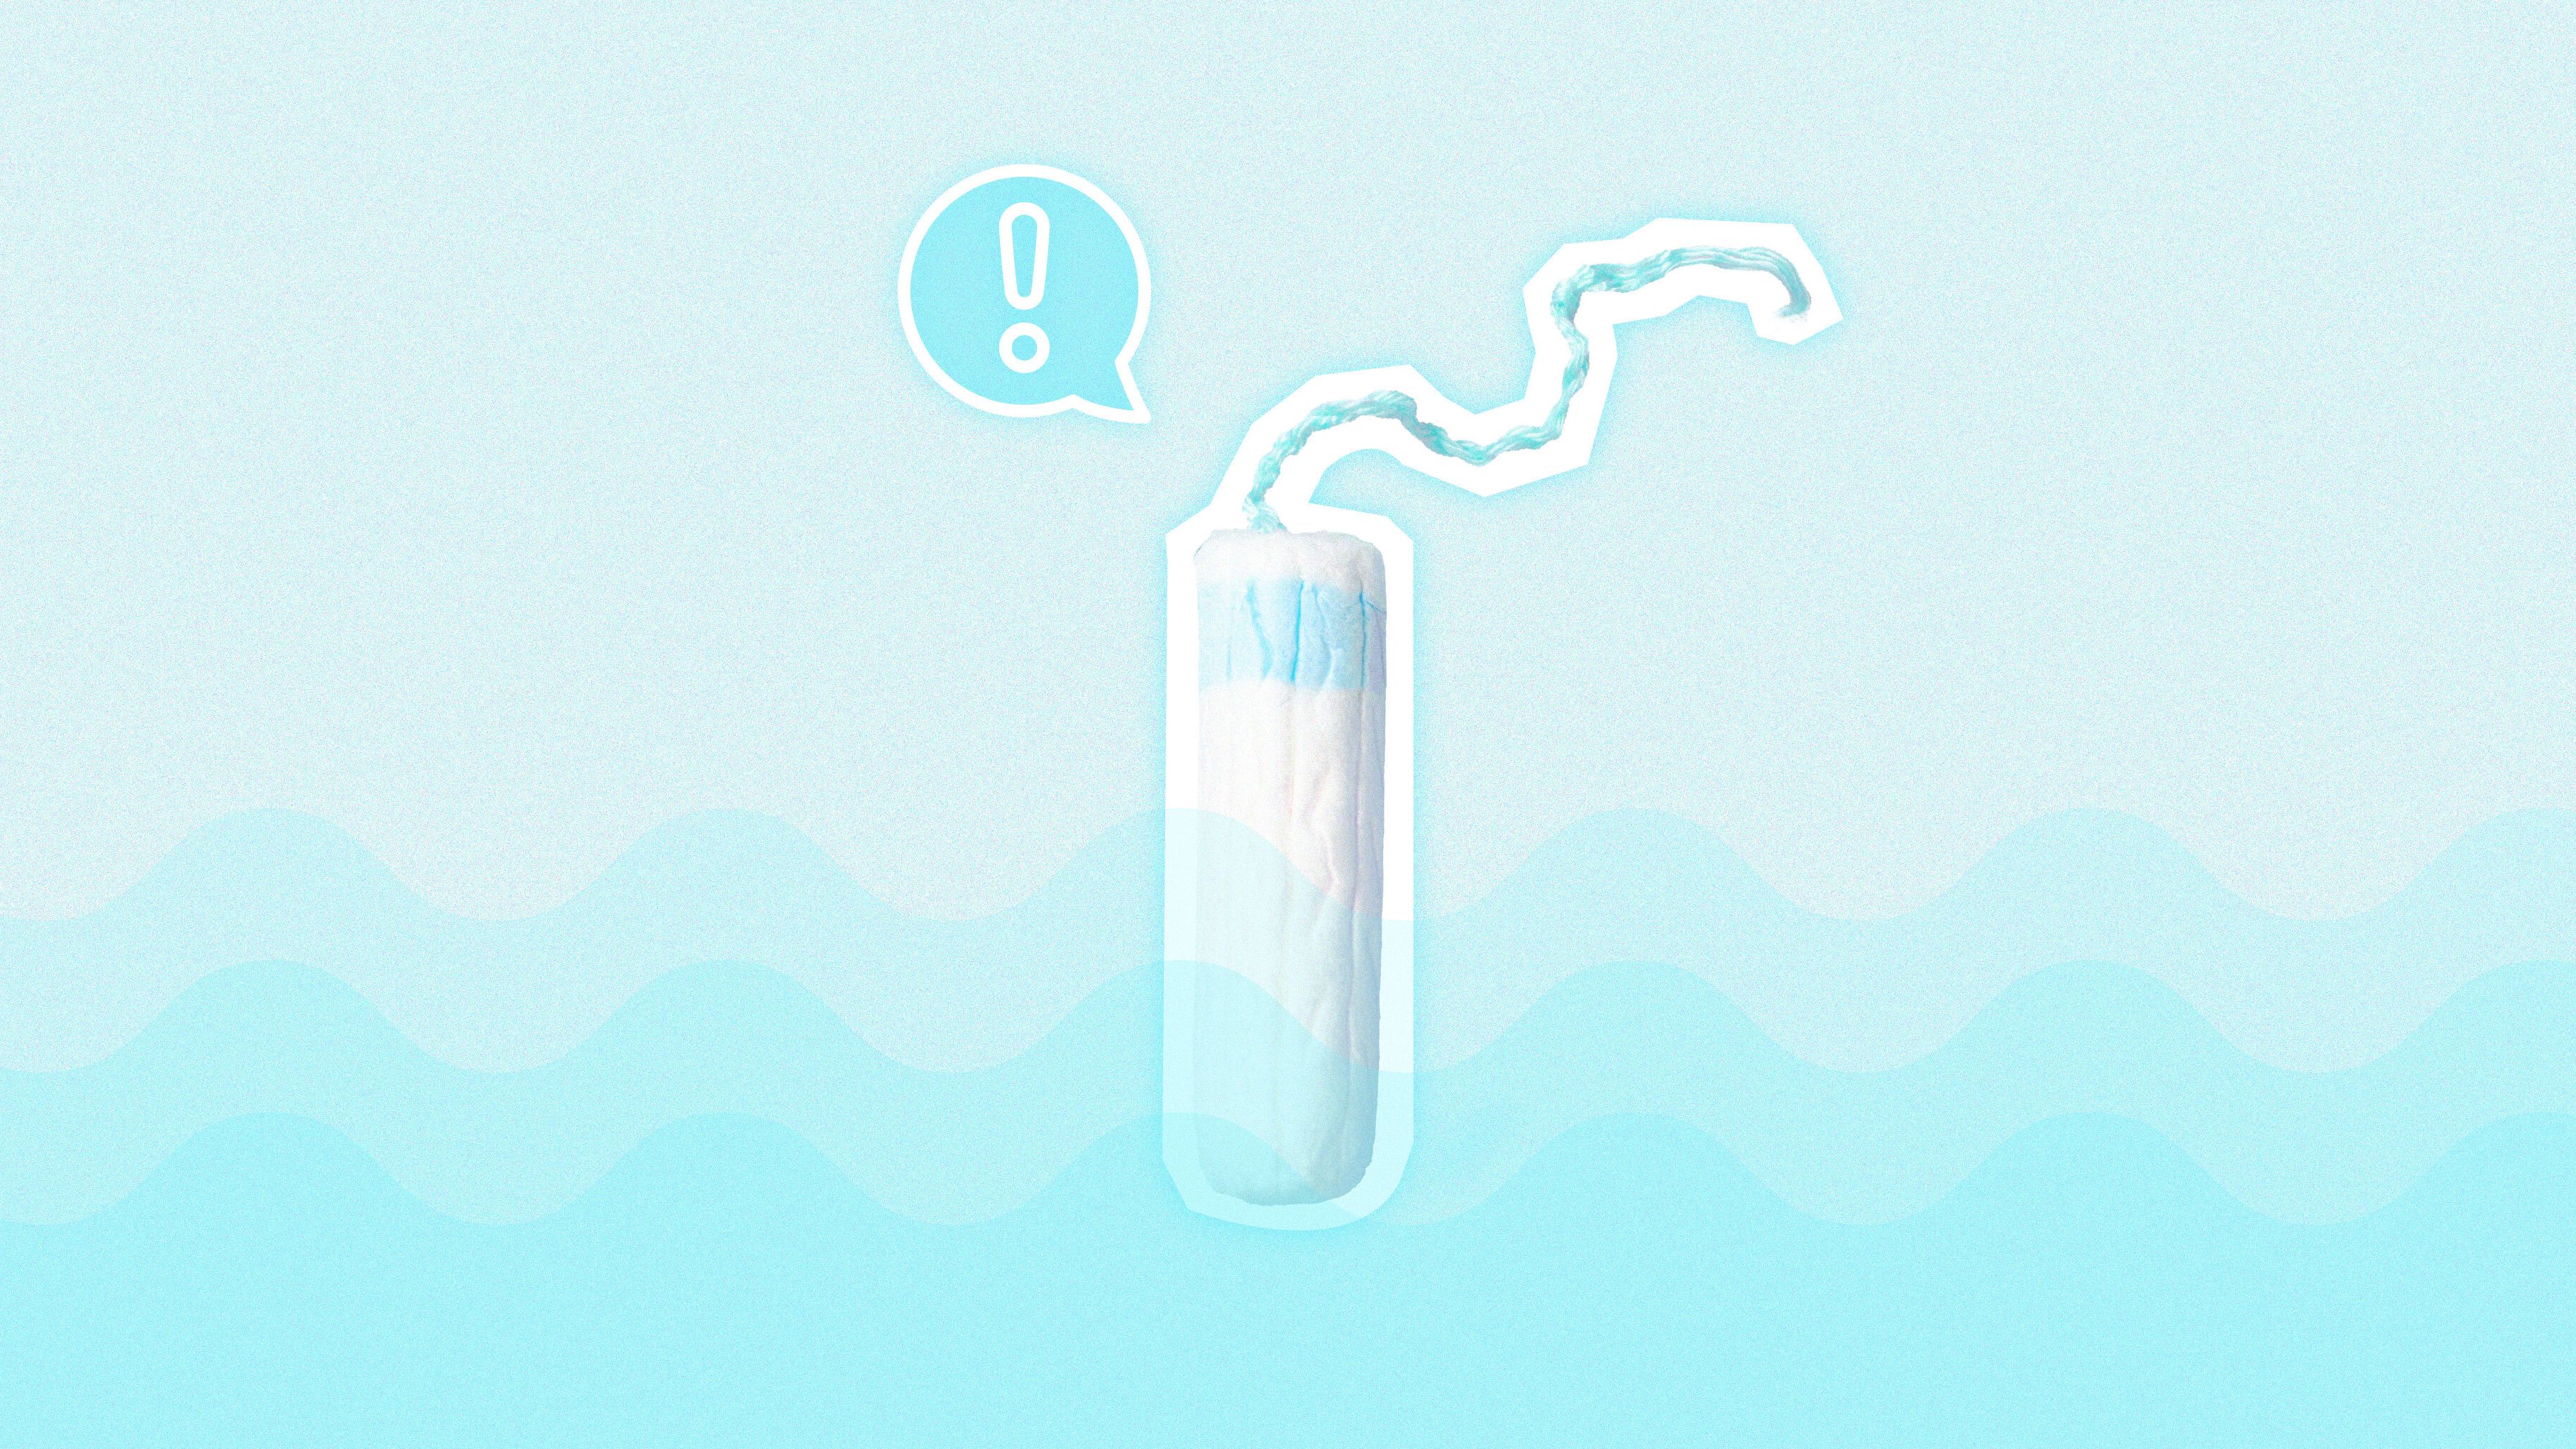 Mom Admits to Swimming Without a Tampon During Her Period